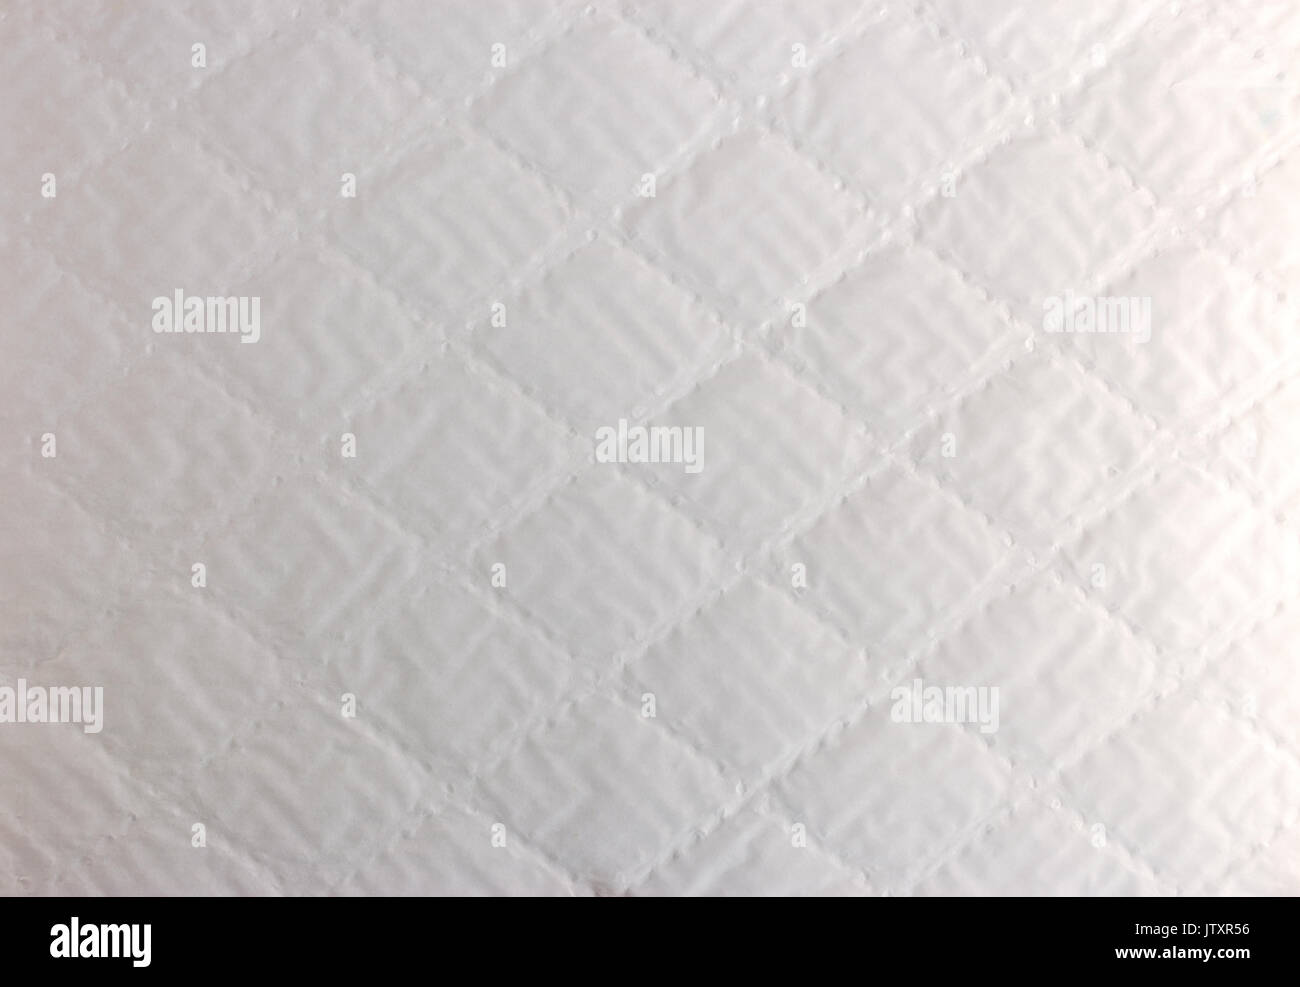 abstract background texture of white bumpy paper with rhombus pattern Stock Photo